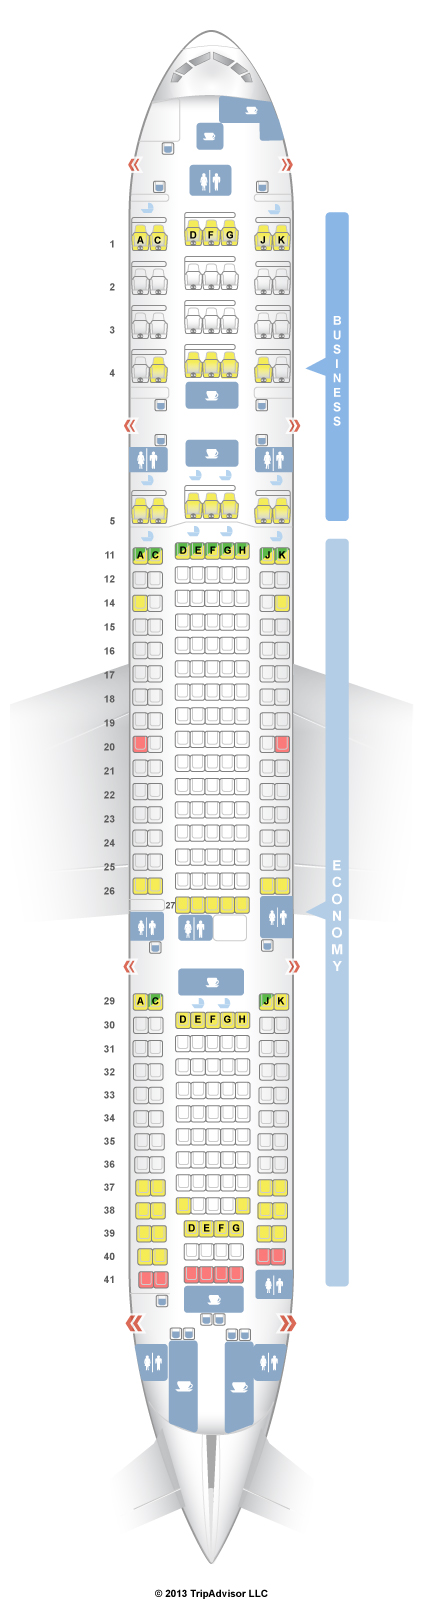 Boeing 737 800 Seating Chart Malaysia Airlines